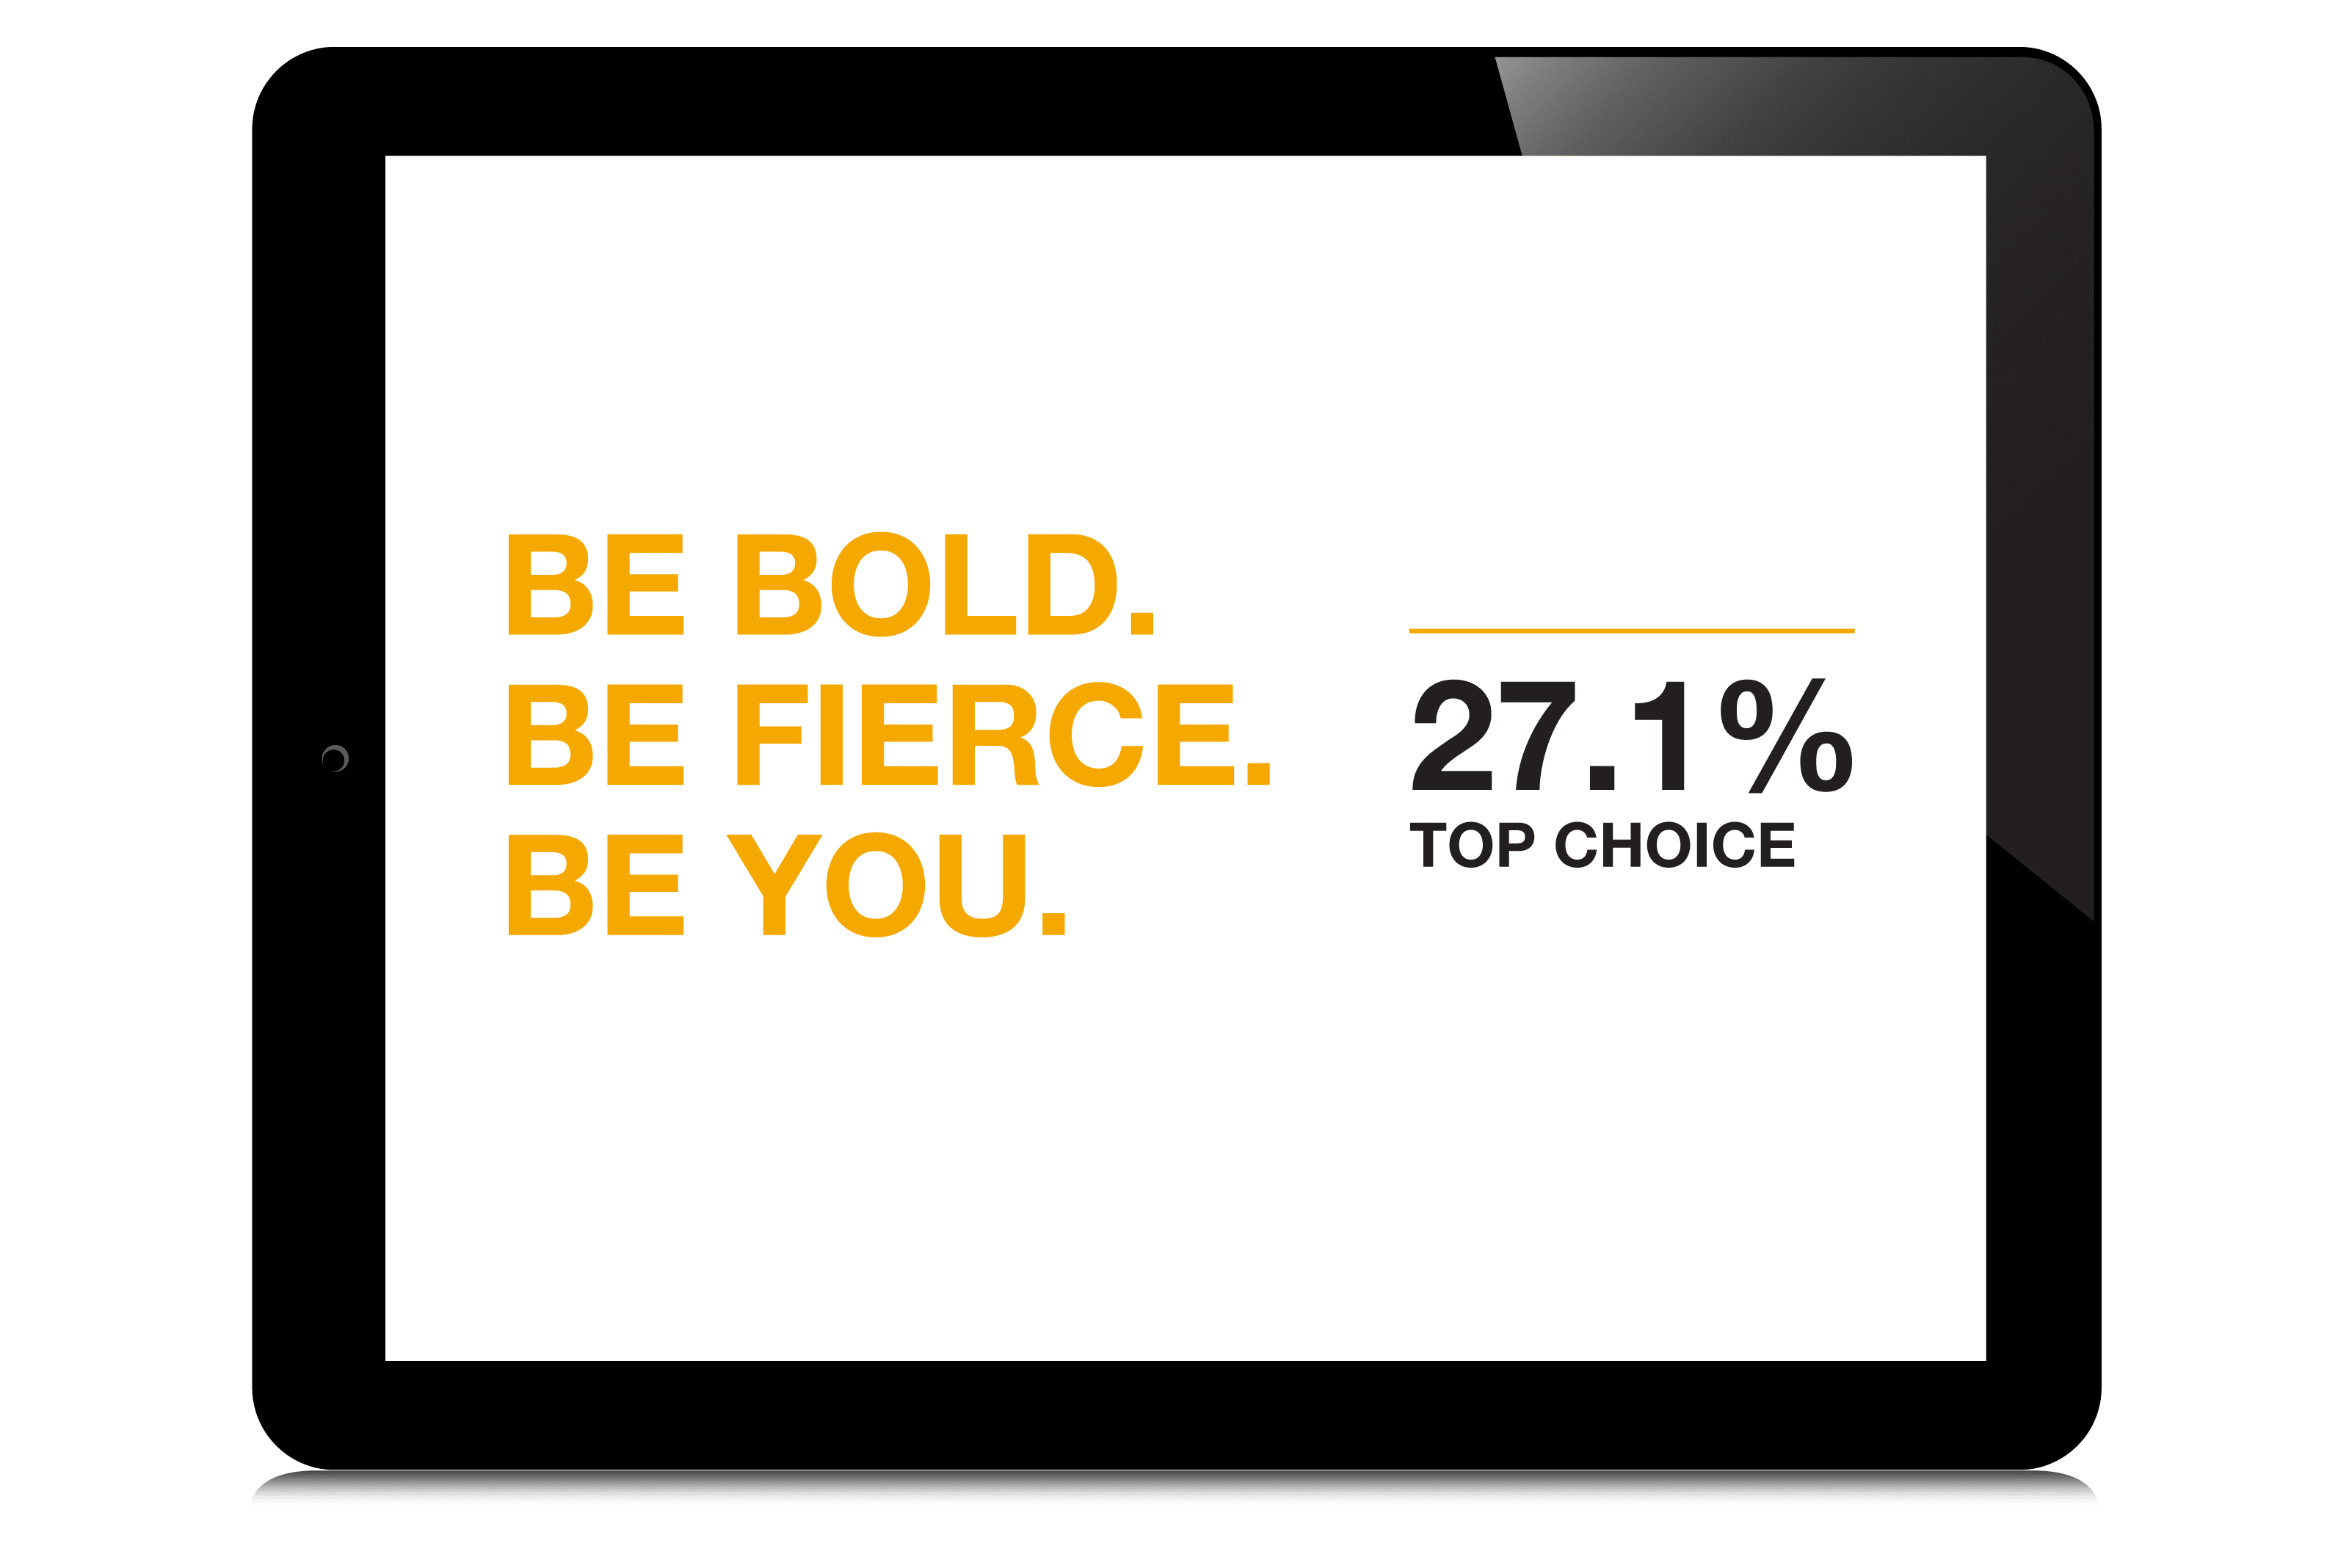 Text on tablet - Be Bold. Be Fierce. Be You. 27.1% Top Choice